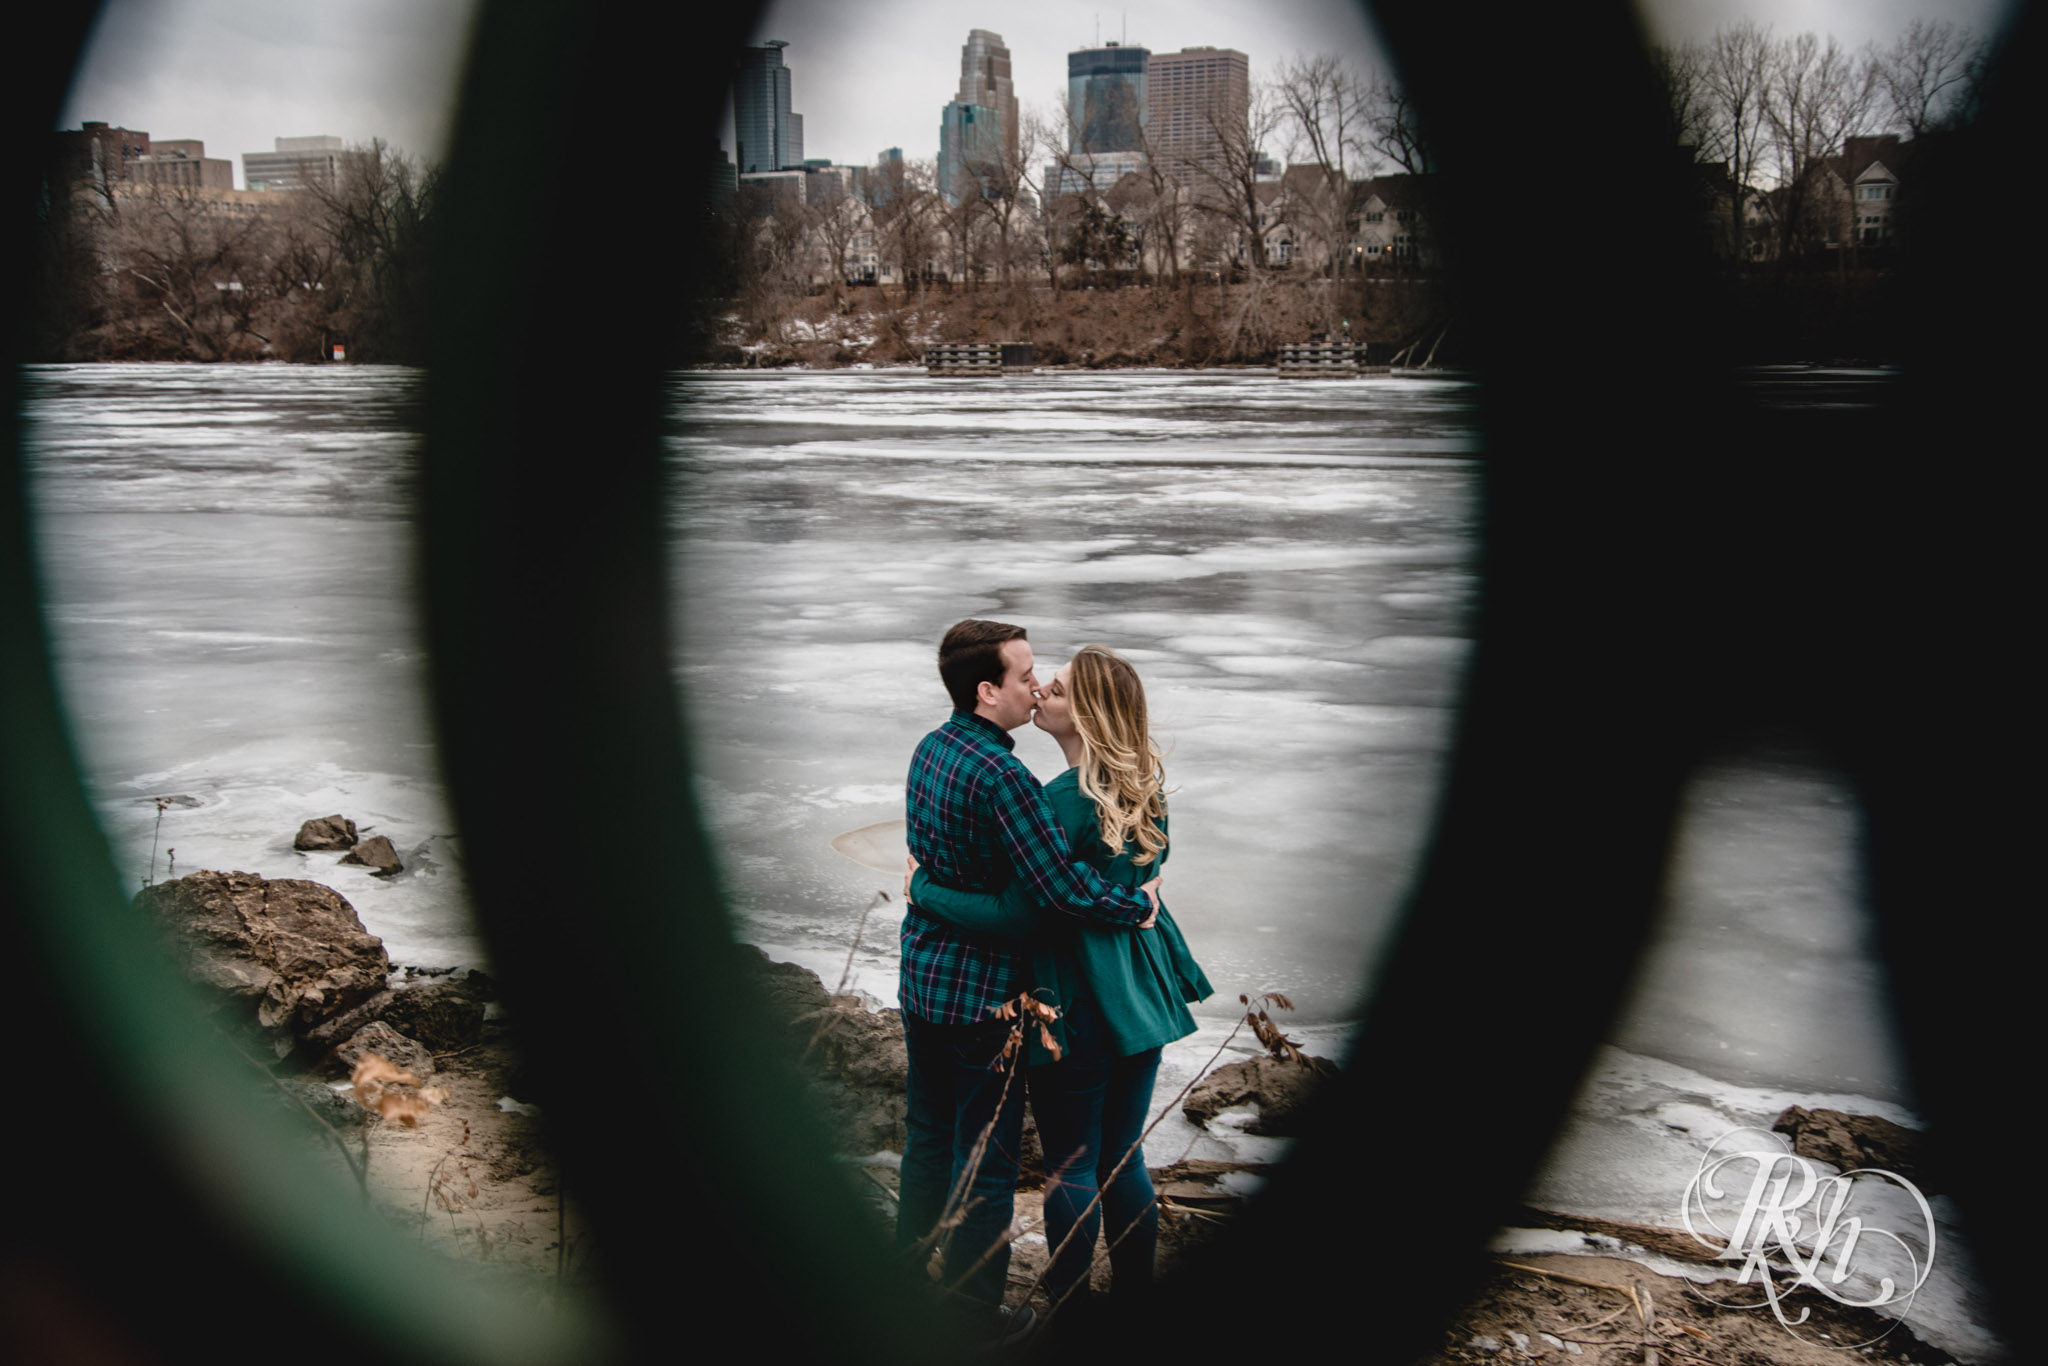 Man and woman kiss on windy day in Boom Island Park in Minneapolis, Minnesota.